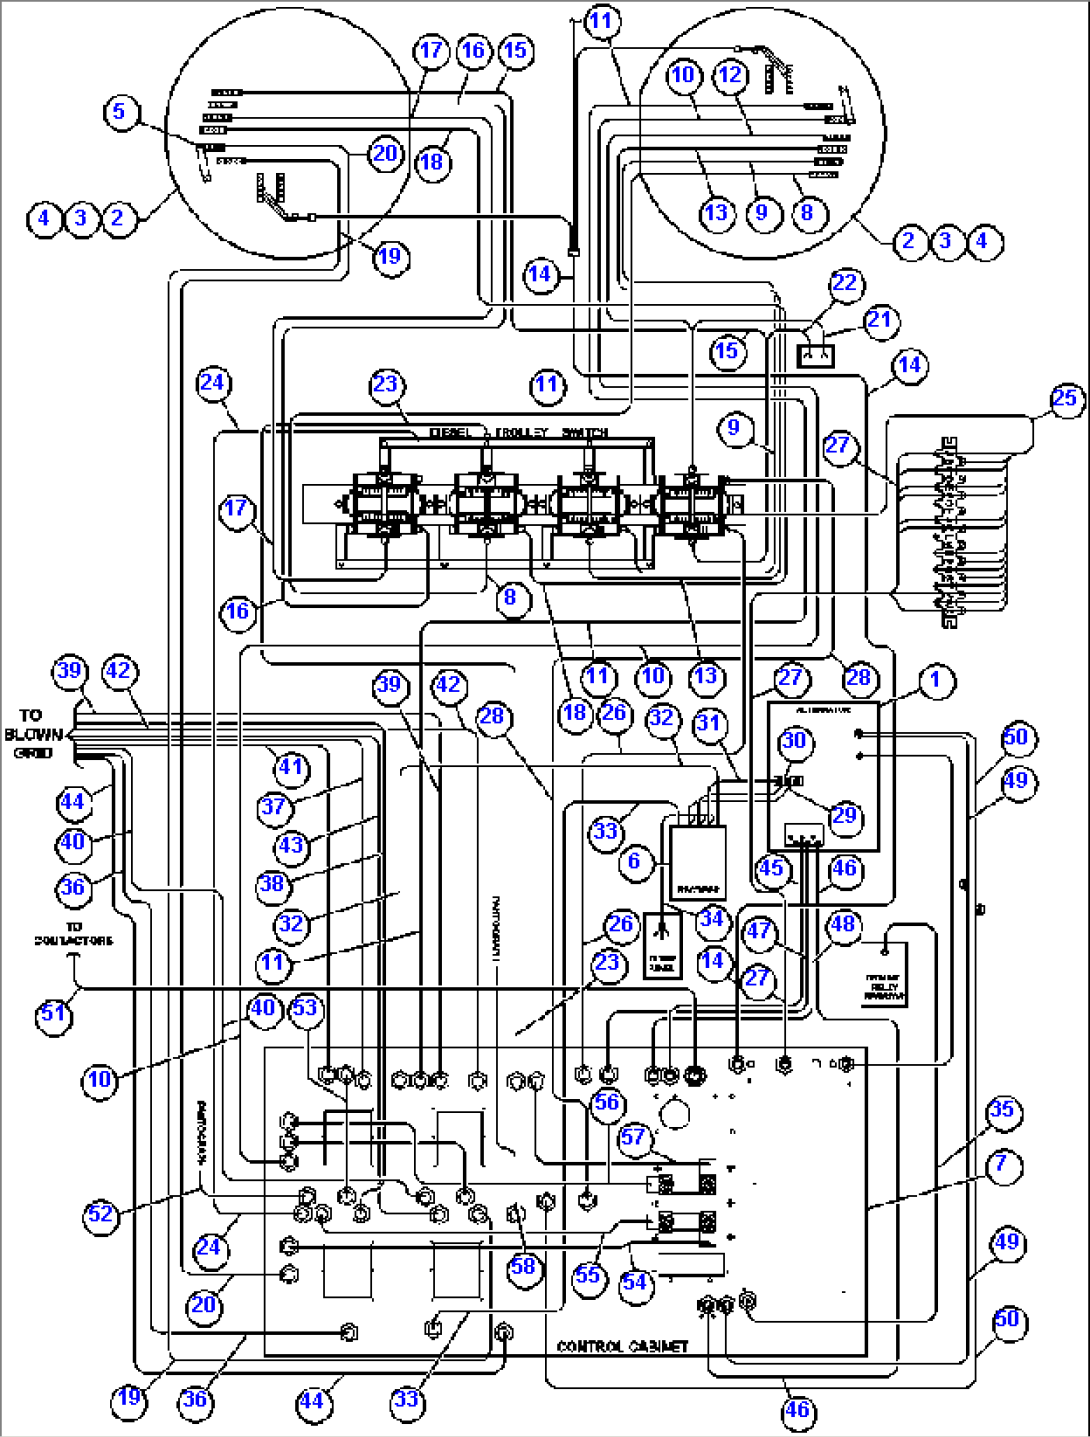 ELECTRIC POWER COMPONENTS WIRING (TROLLEY)